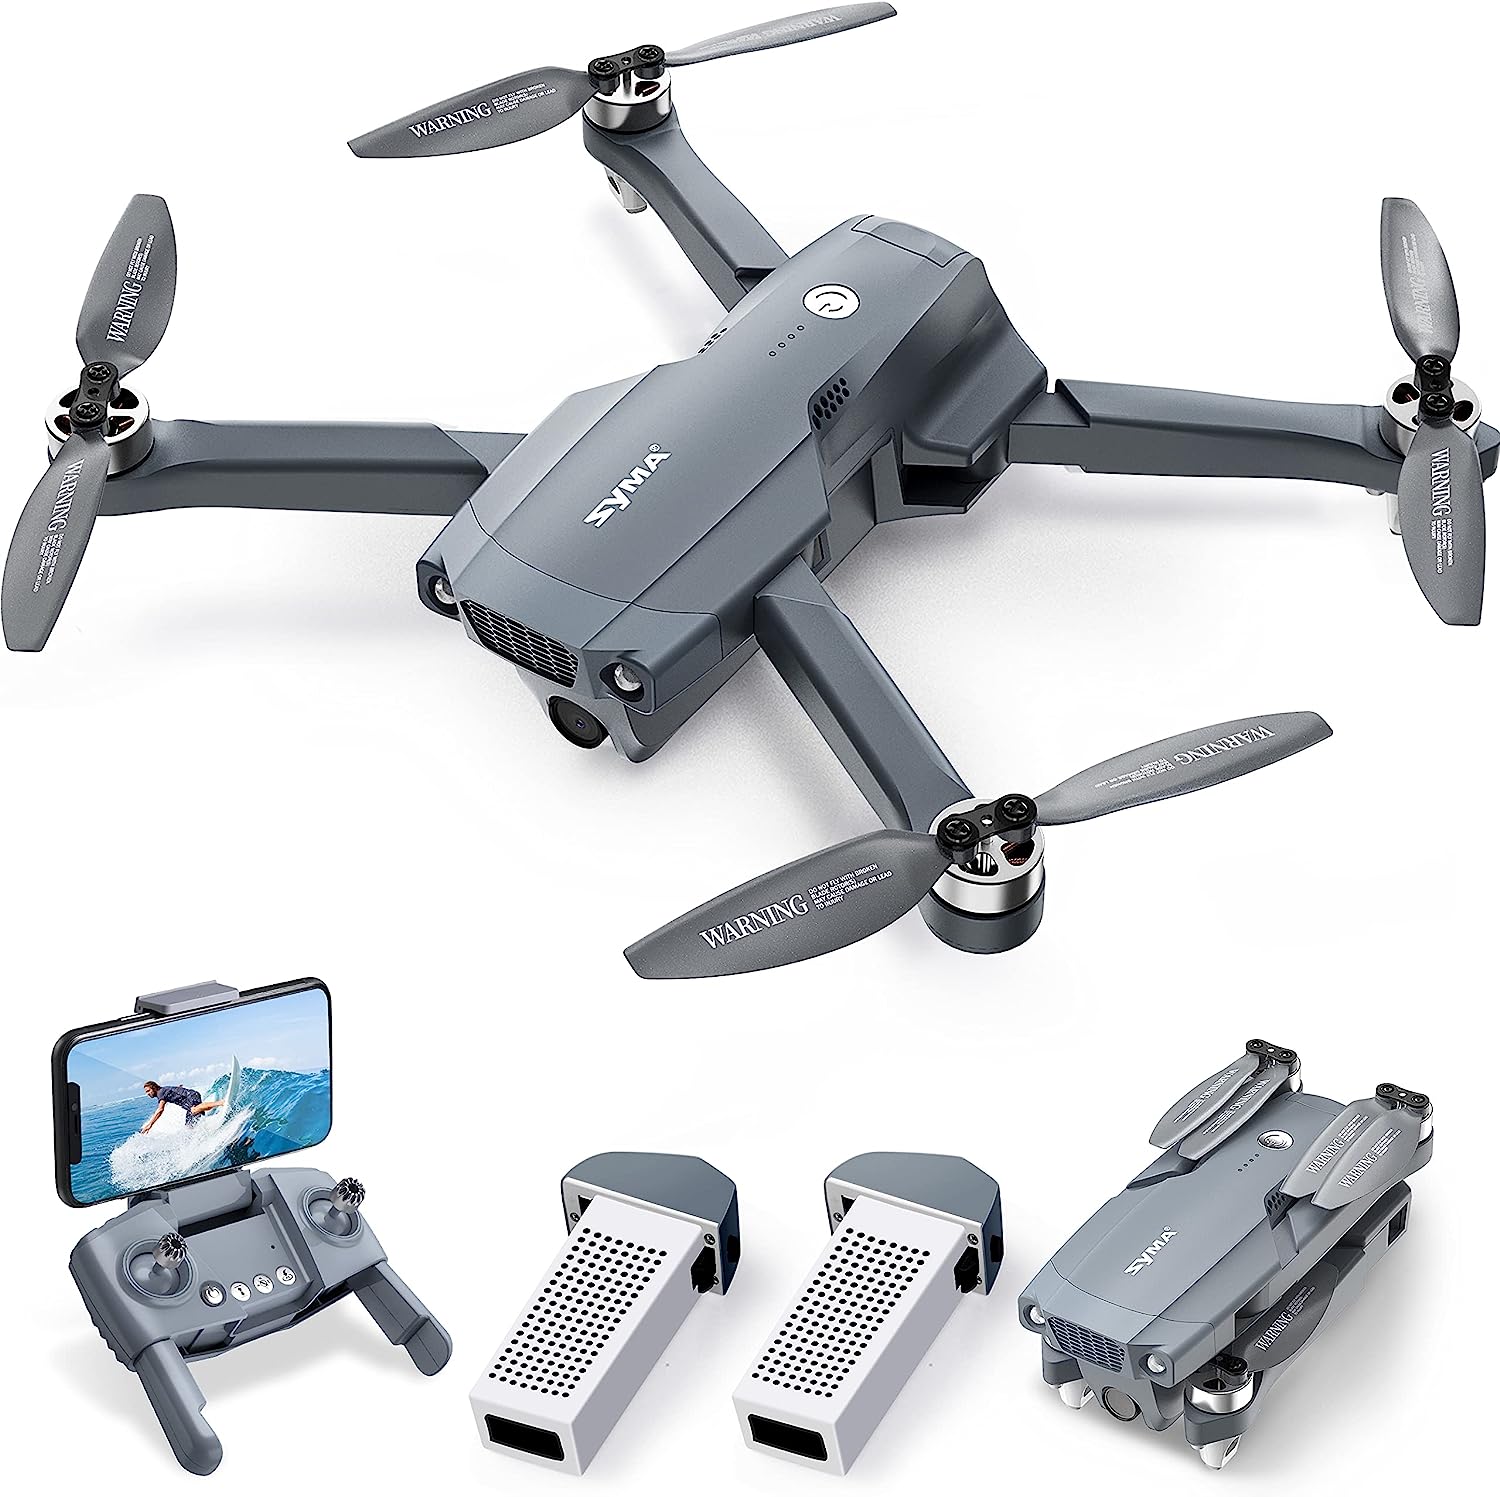 SYMA X500Pro GPS Drones with 4K UHD Camera for Adults, RC Quadcopter - $120